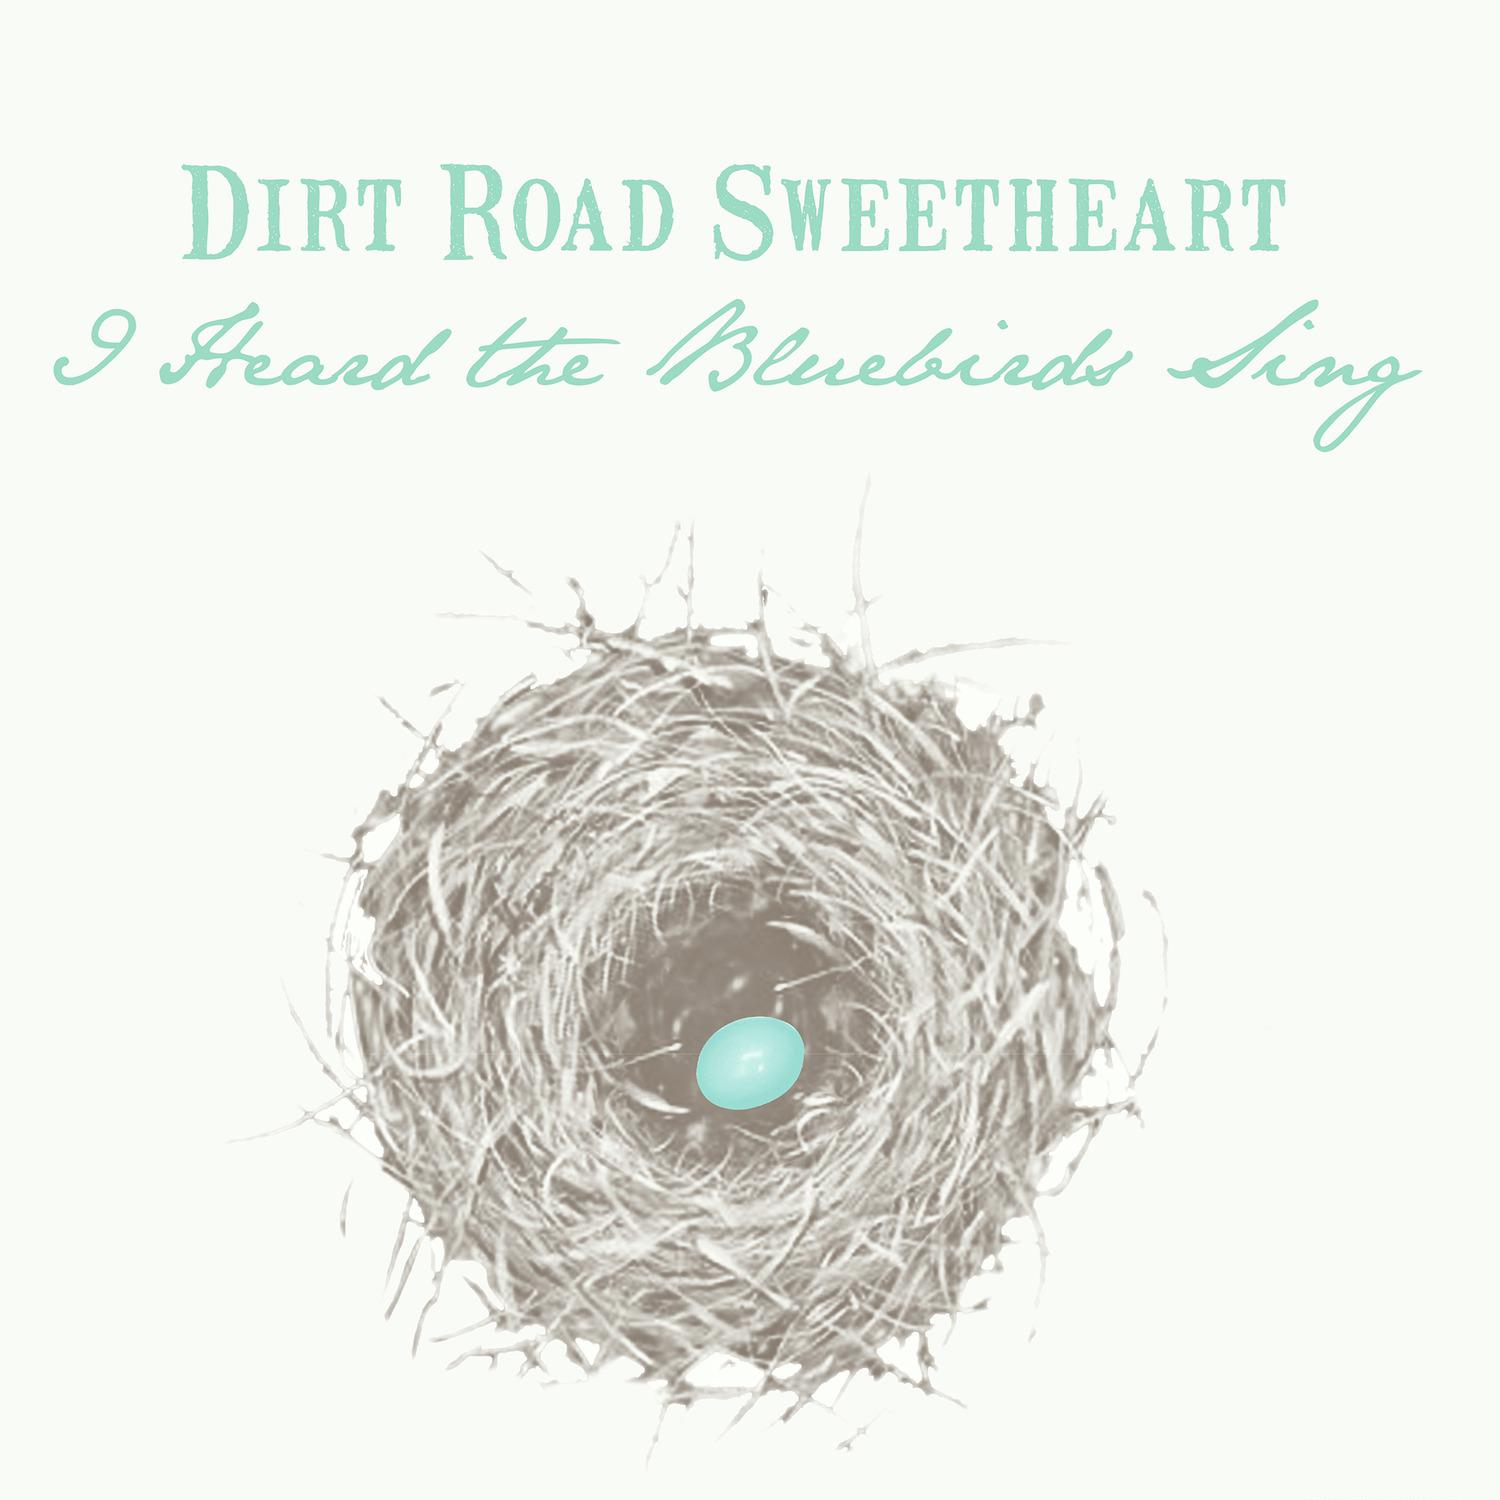 Dirt Road Sweetheart - The Sweetest Gift